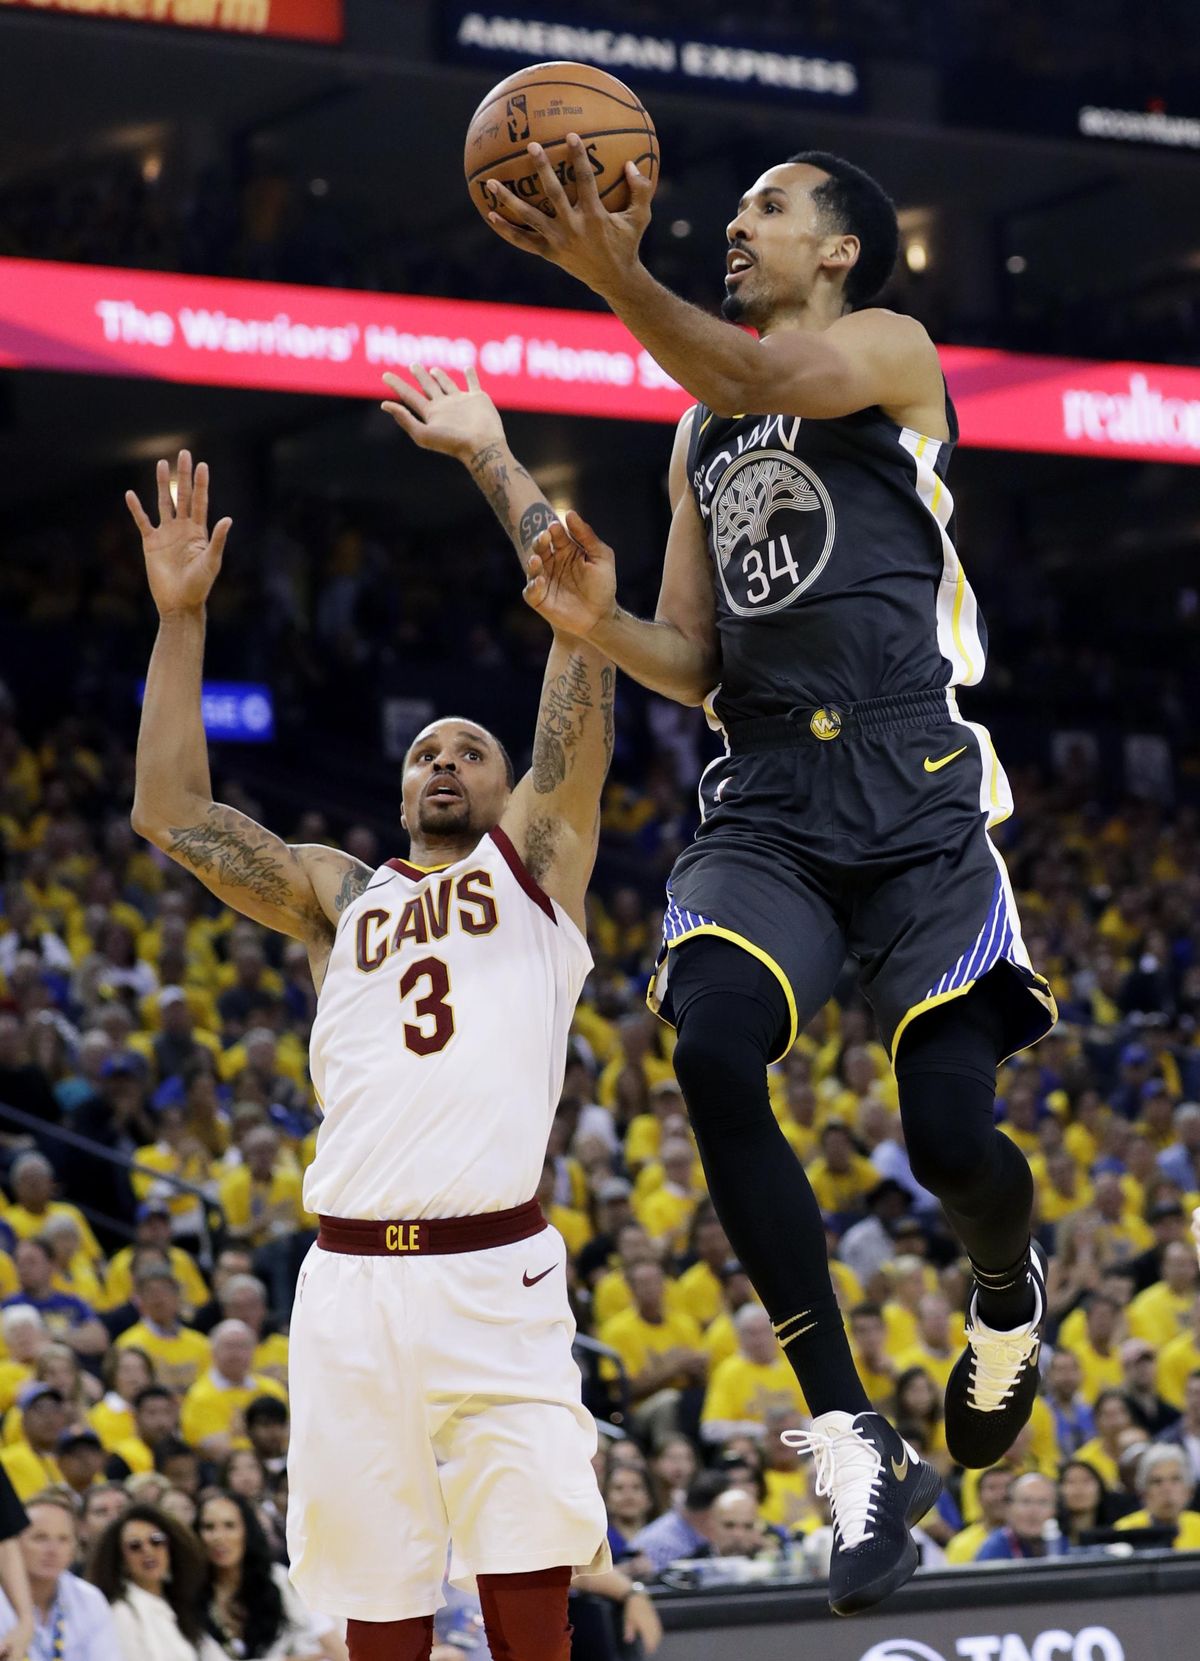 Golden State Warriors guard Shaun Livingston (34) shoots against Cleveland Cavaliers guard George Hill (3) during the first half of Game 2 of basketball’s NBA Finals in Oakland, Calif., Sunday, June 3, 2018. (Marcio Jose Sanchez / Associated Press)